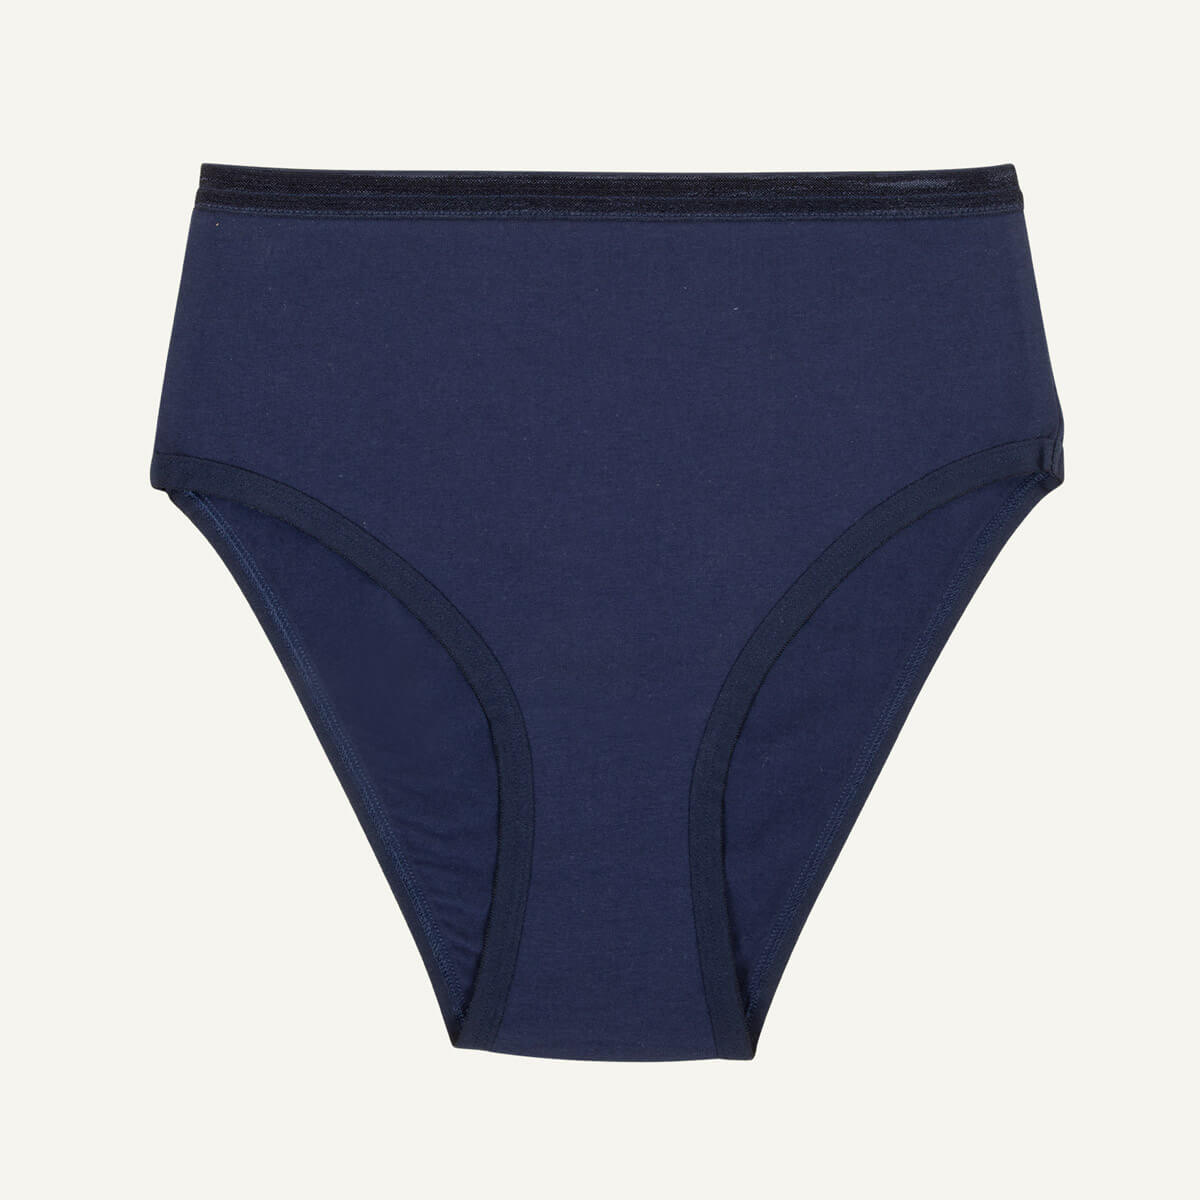 Shop High Waisted Underwear For Women Cotton with great discounts